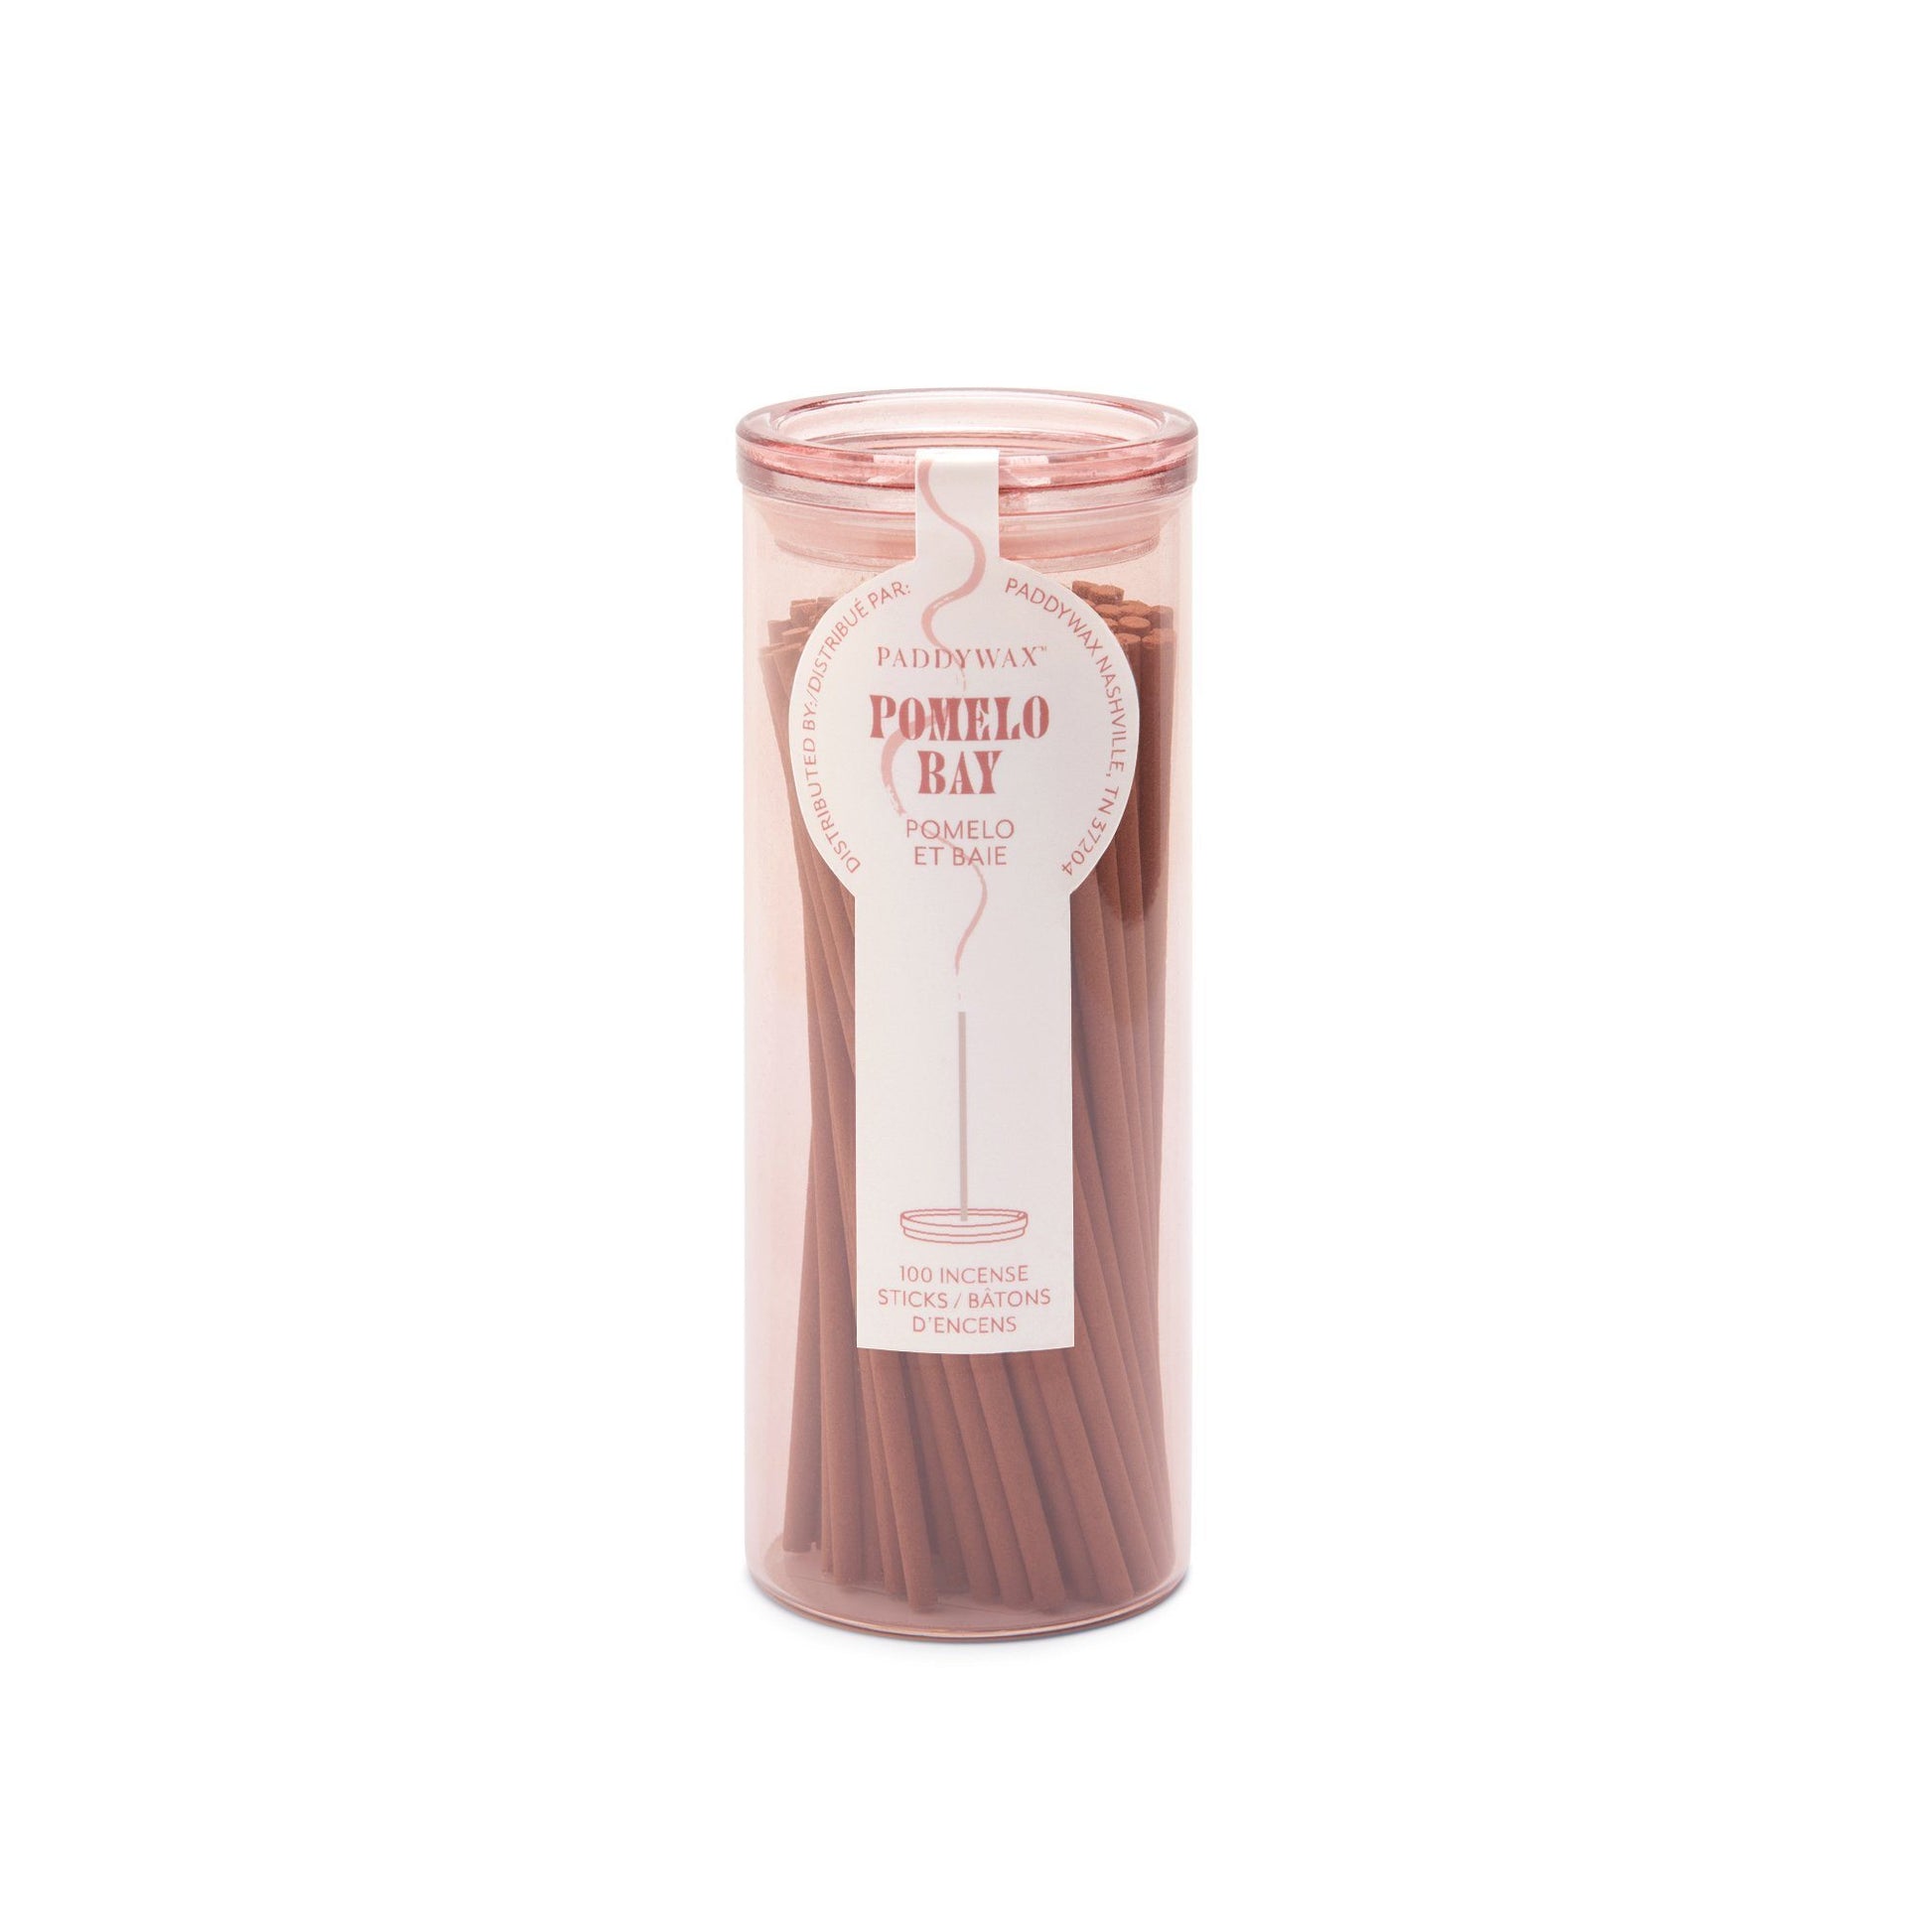 Pink glass cylinder with white label holding 100 incense sticks for flameless fragrance; 